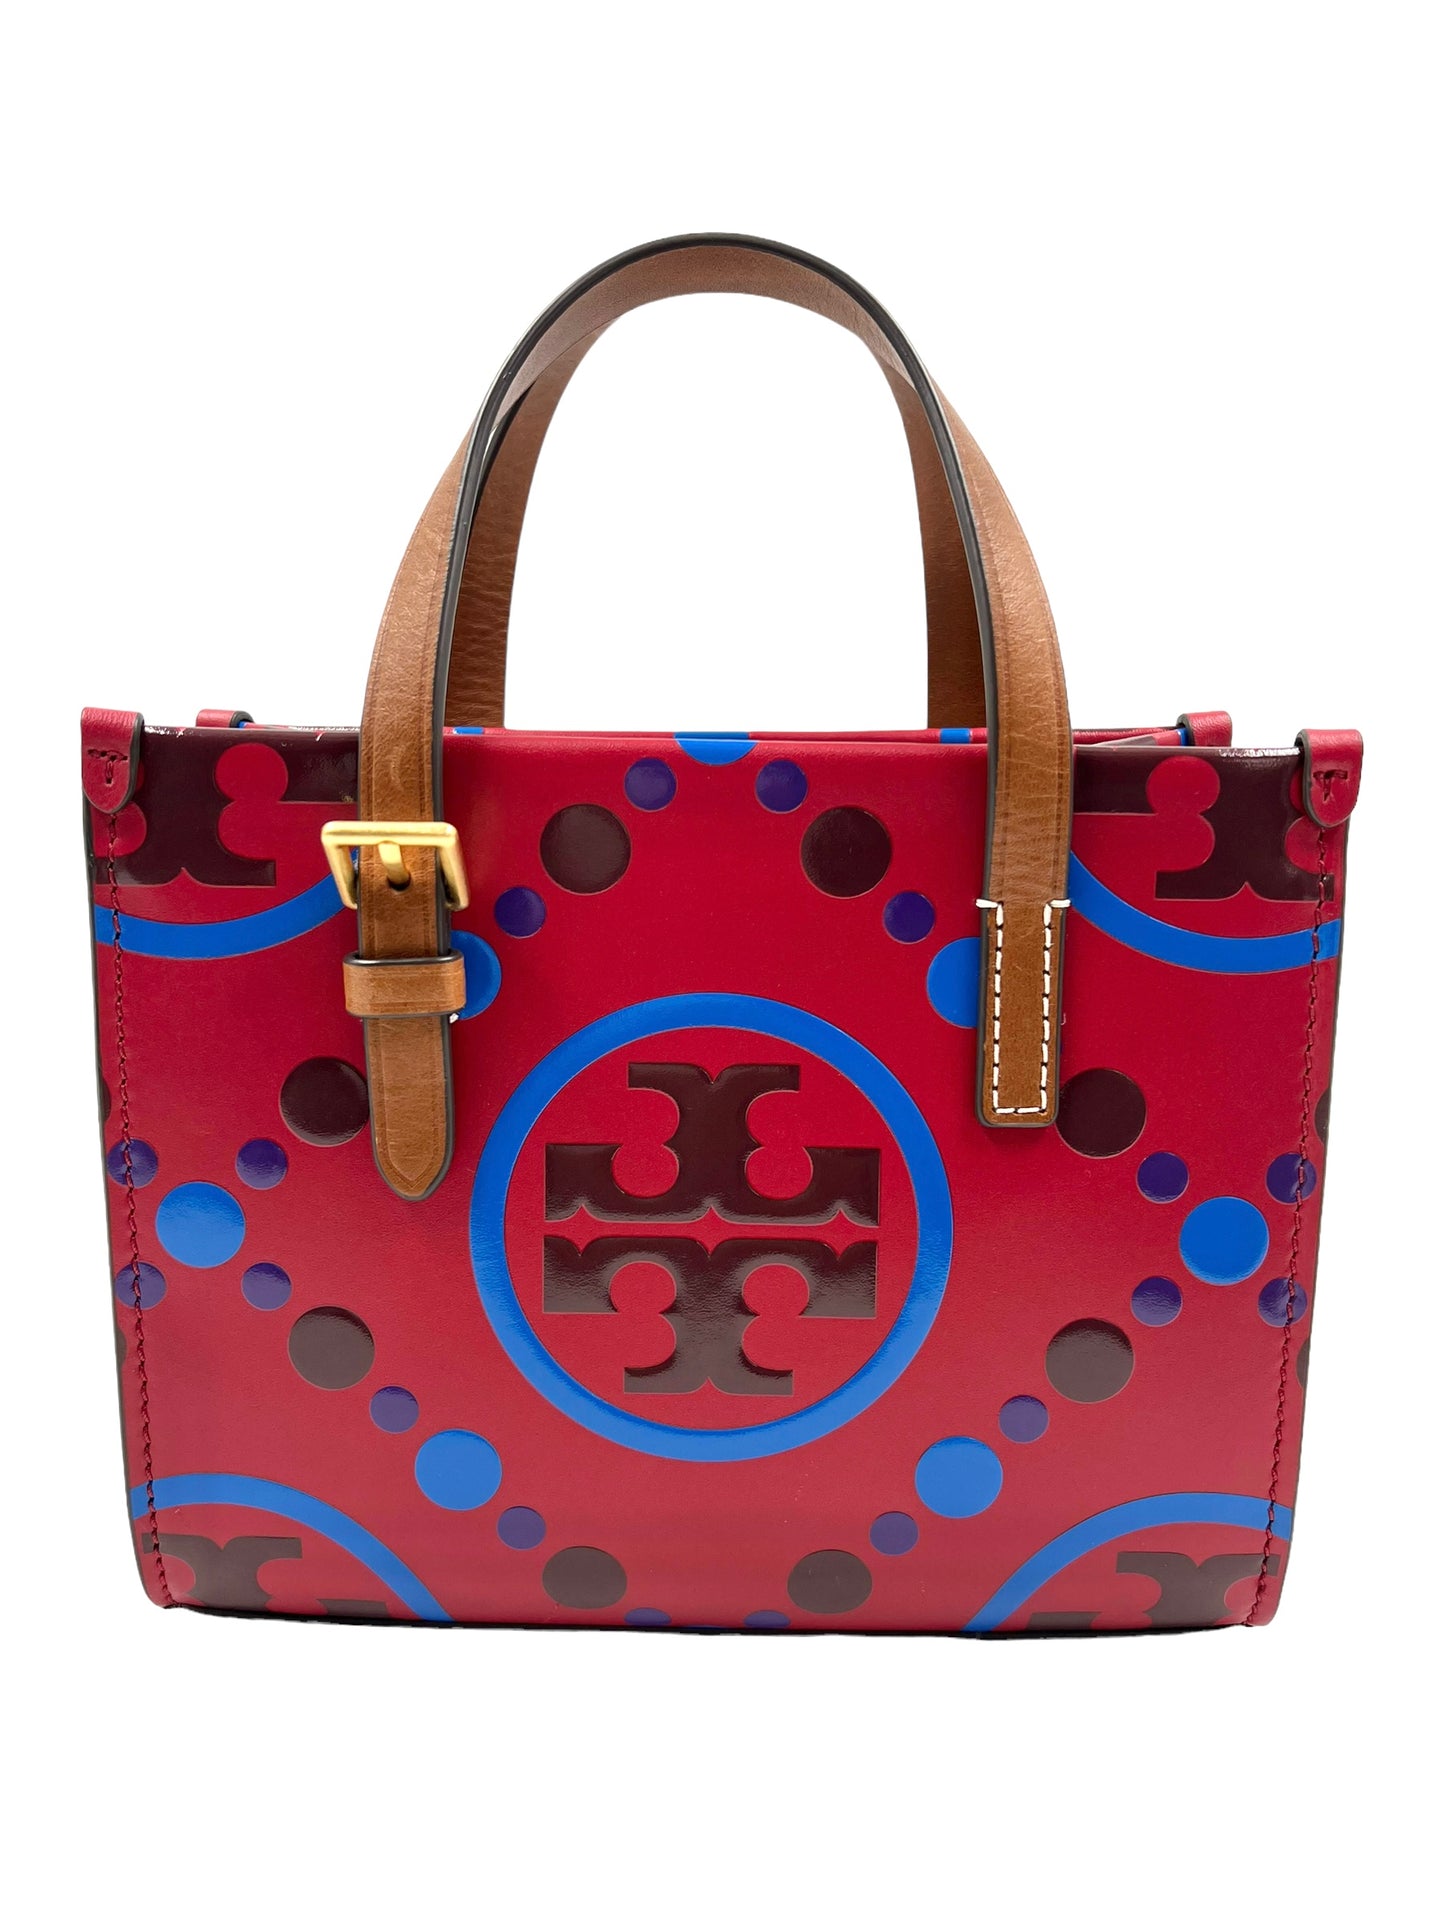 Tory Burch Mini T Leather Monogram Contrast Embossed Square Tote